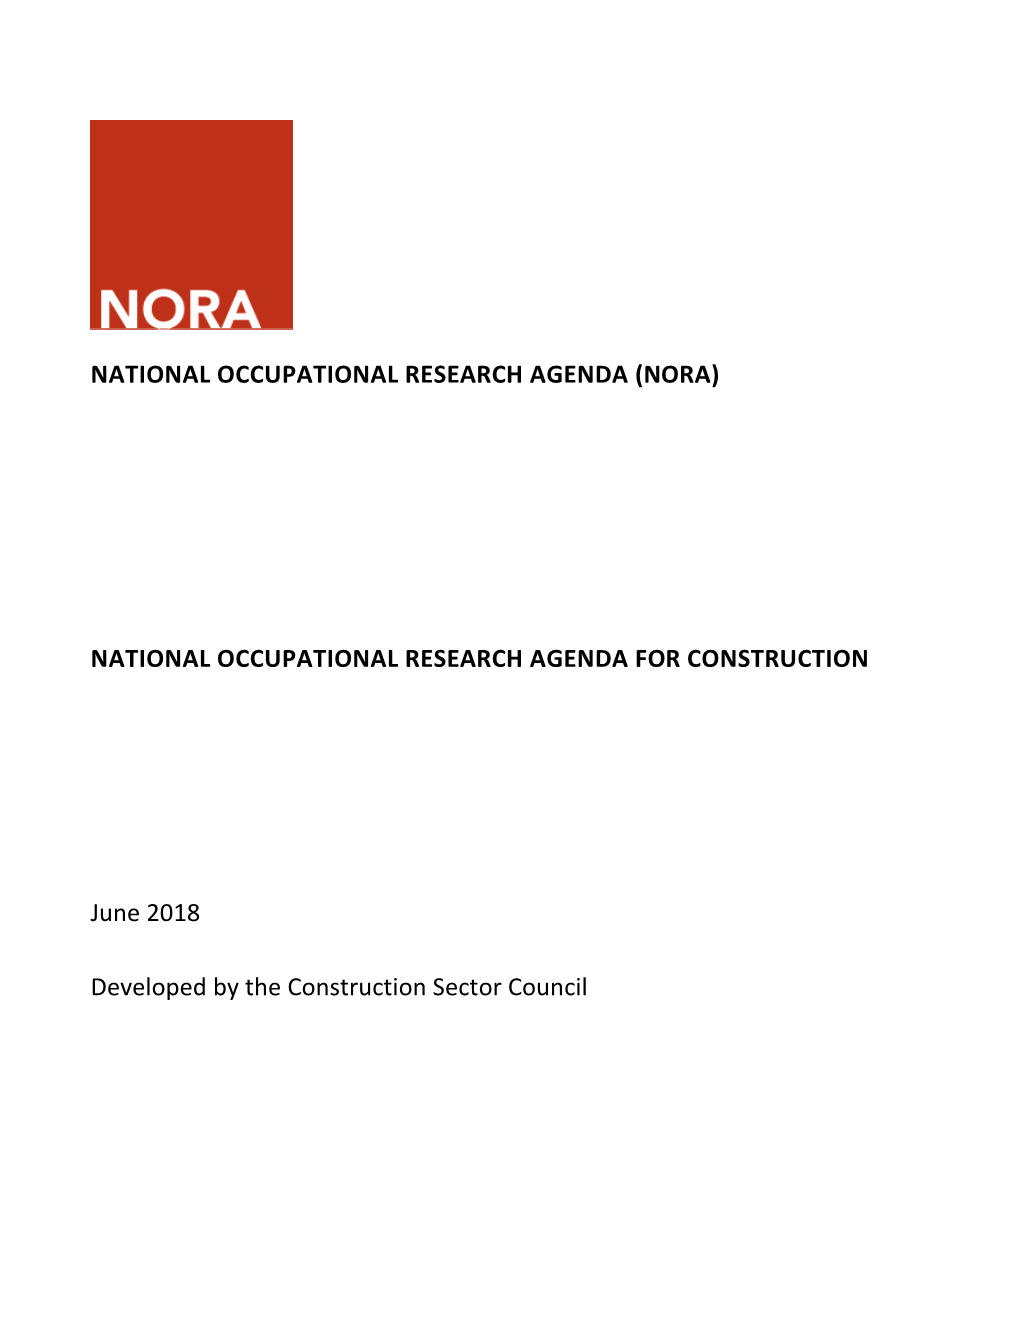 National Occupational Research Agenda for Construction June 2018